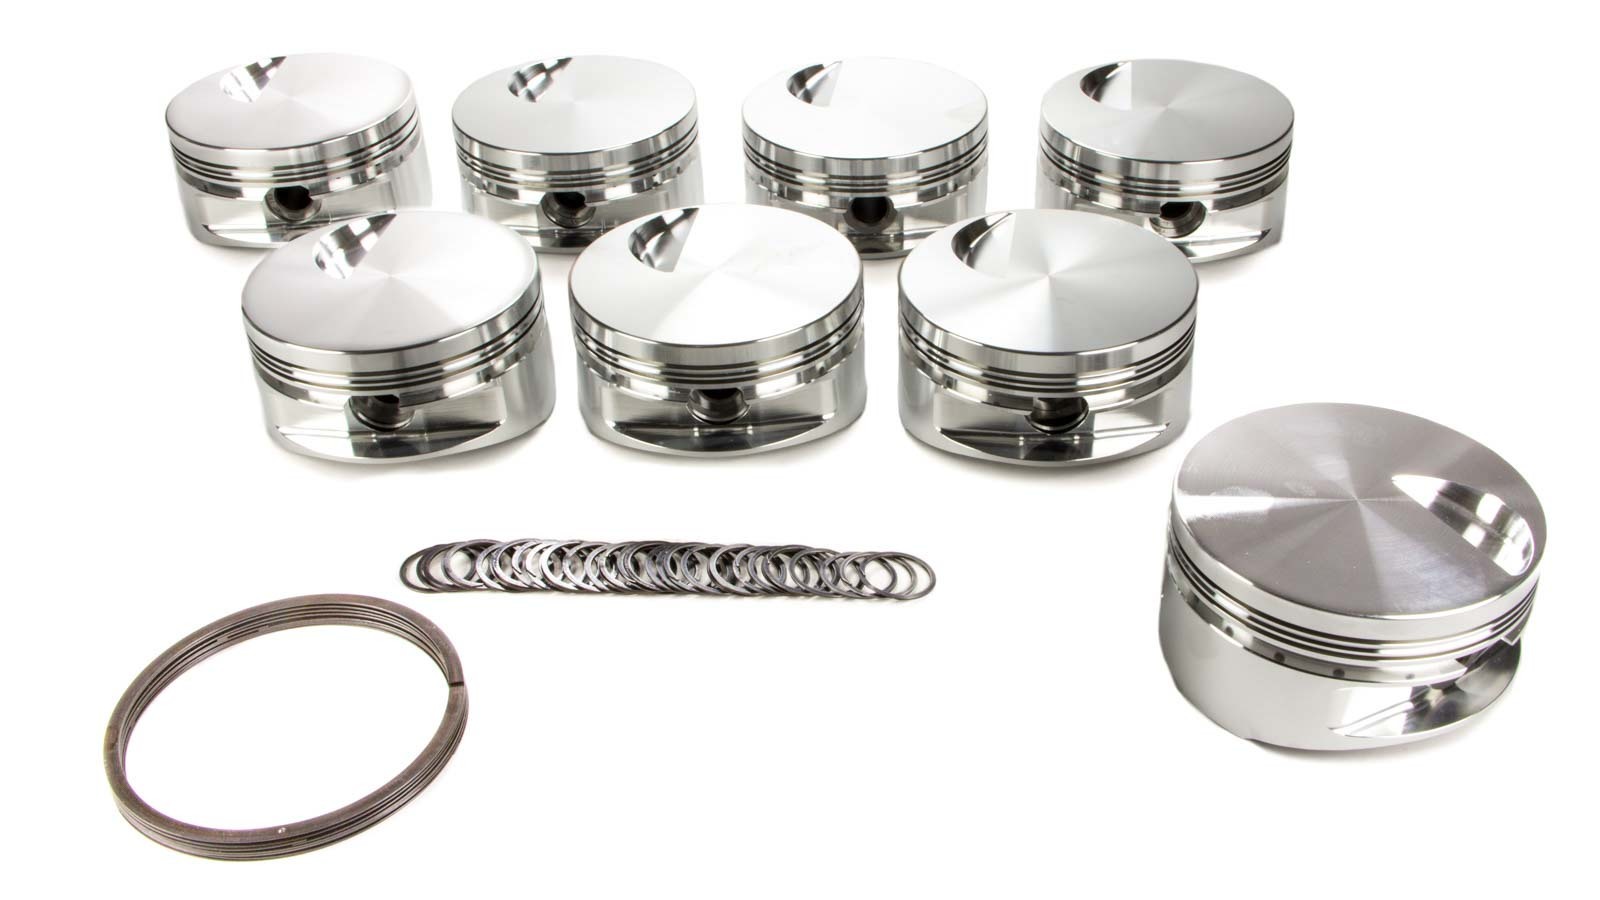 JE Pistons 257984 Piston, Big Block Flat Top, Forged, 4.500 in Bore, 1/16 x 1/16 x 3/16 in Ring Grooves, Minus 3.00 cc, Big Block Chevy, Set of 8